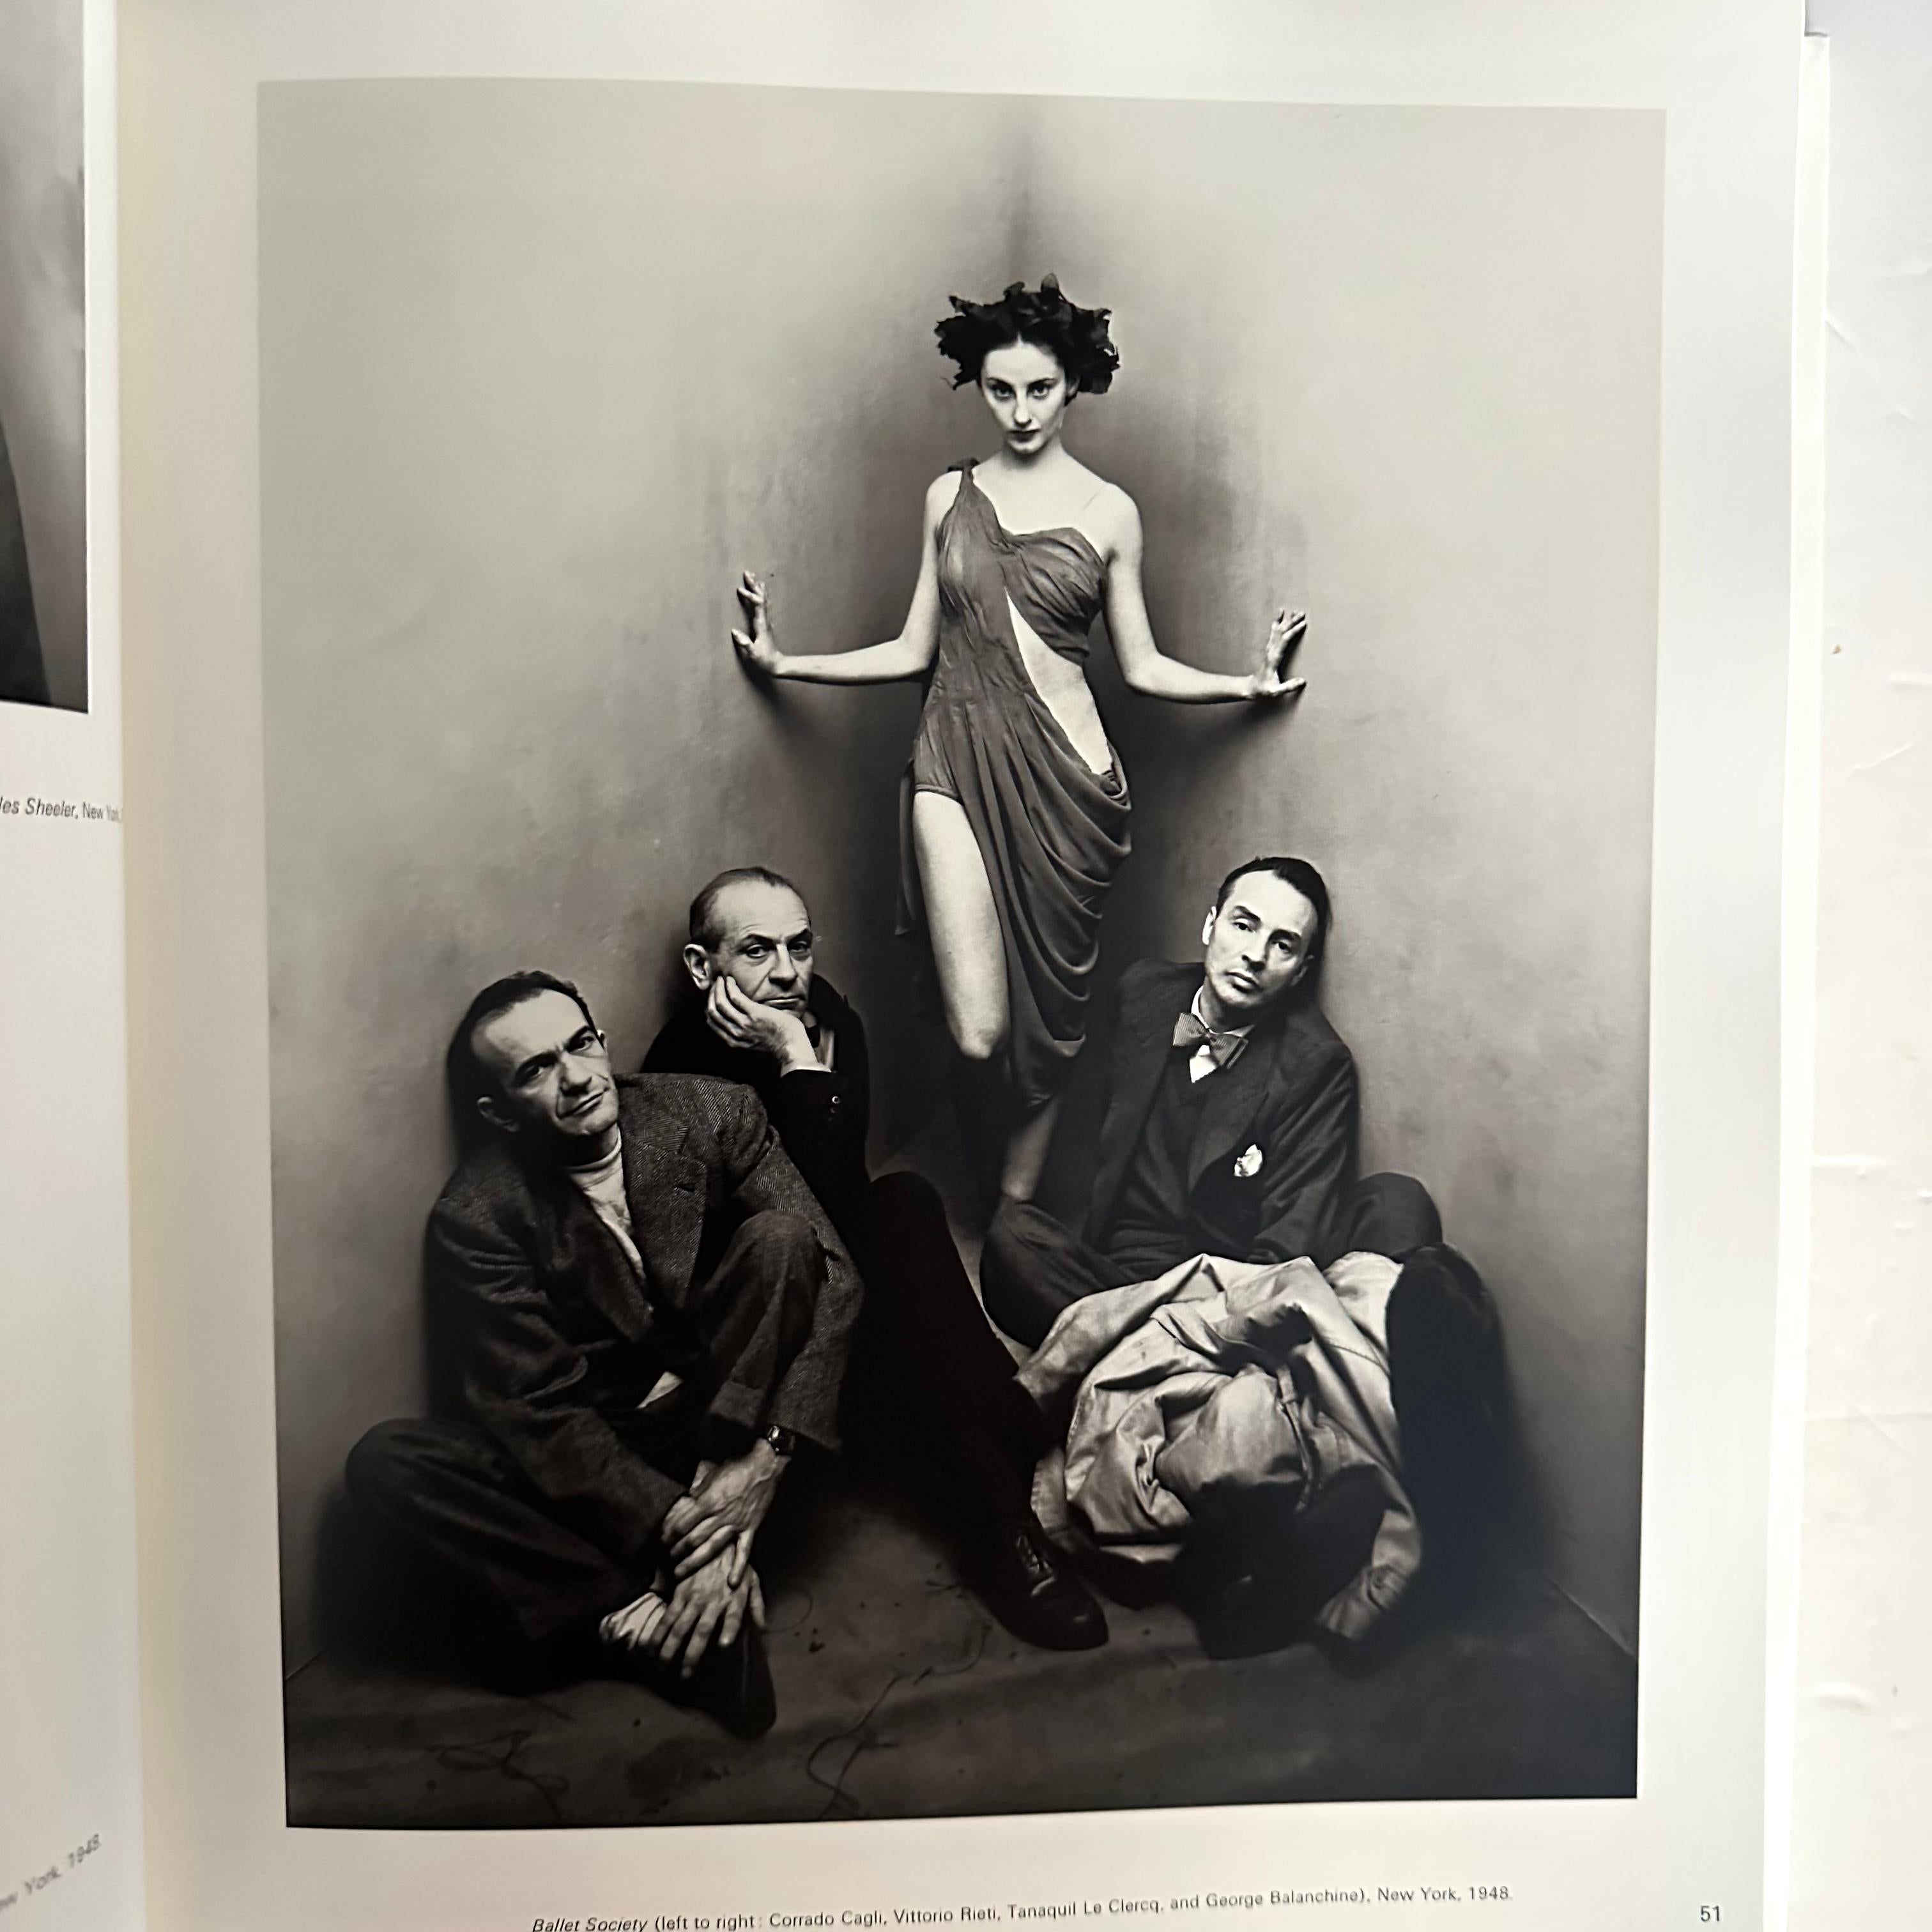 Late 20th Century Passage: A work record - Irving Penn